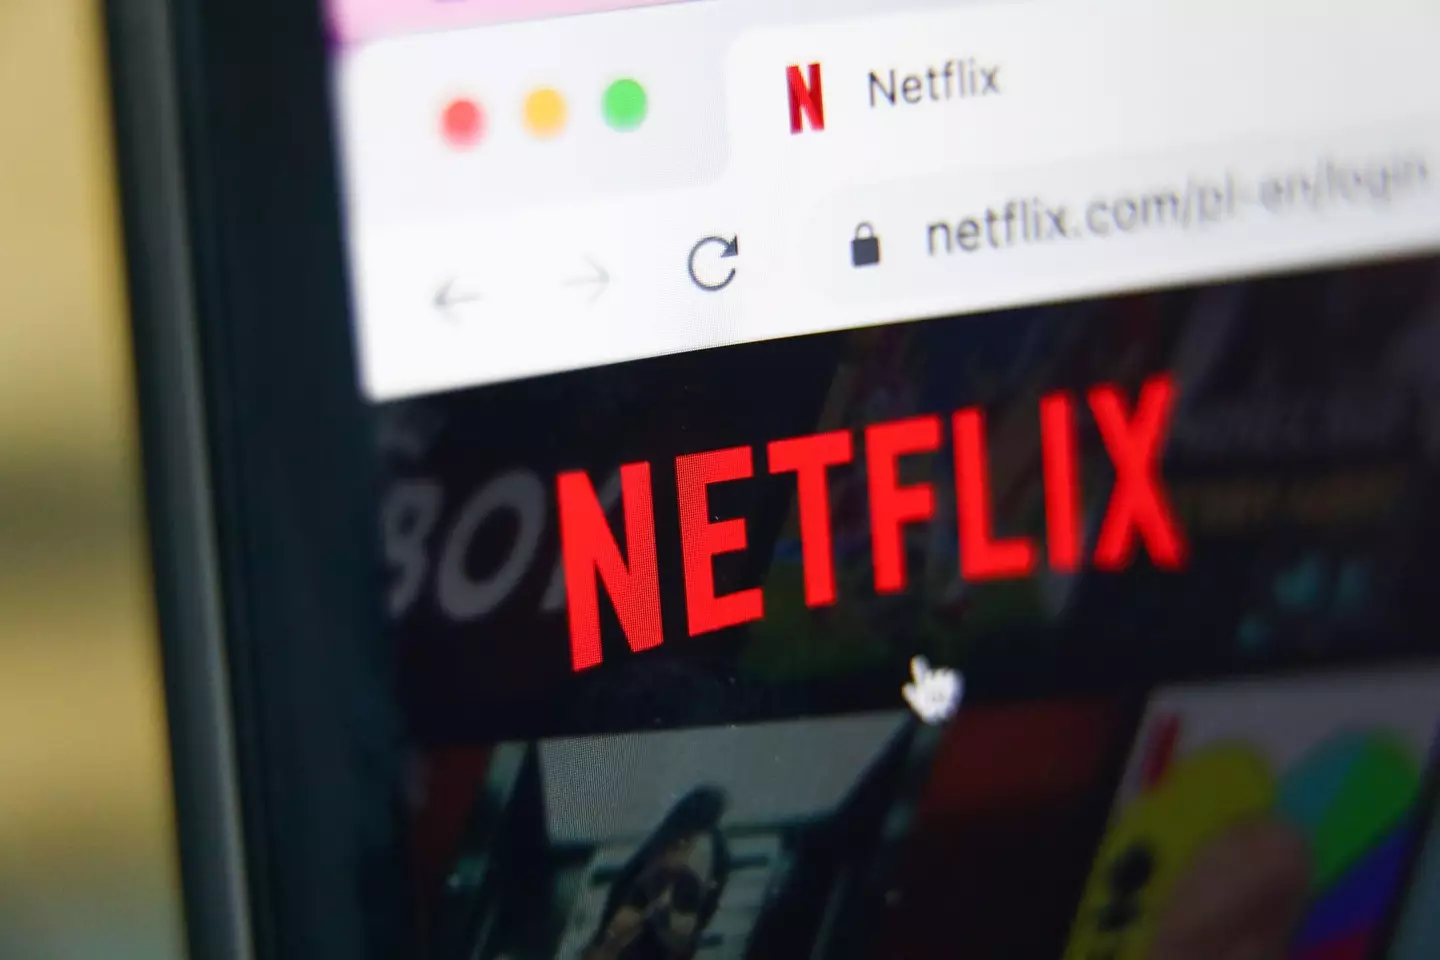 The days of sharing Netflix passwords have come to an end.